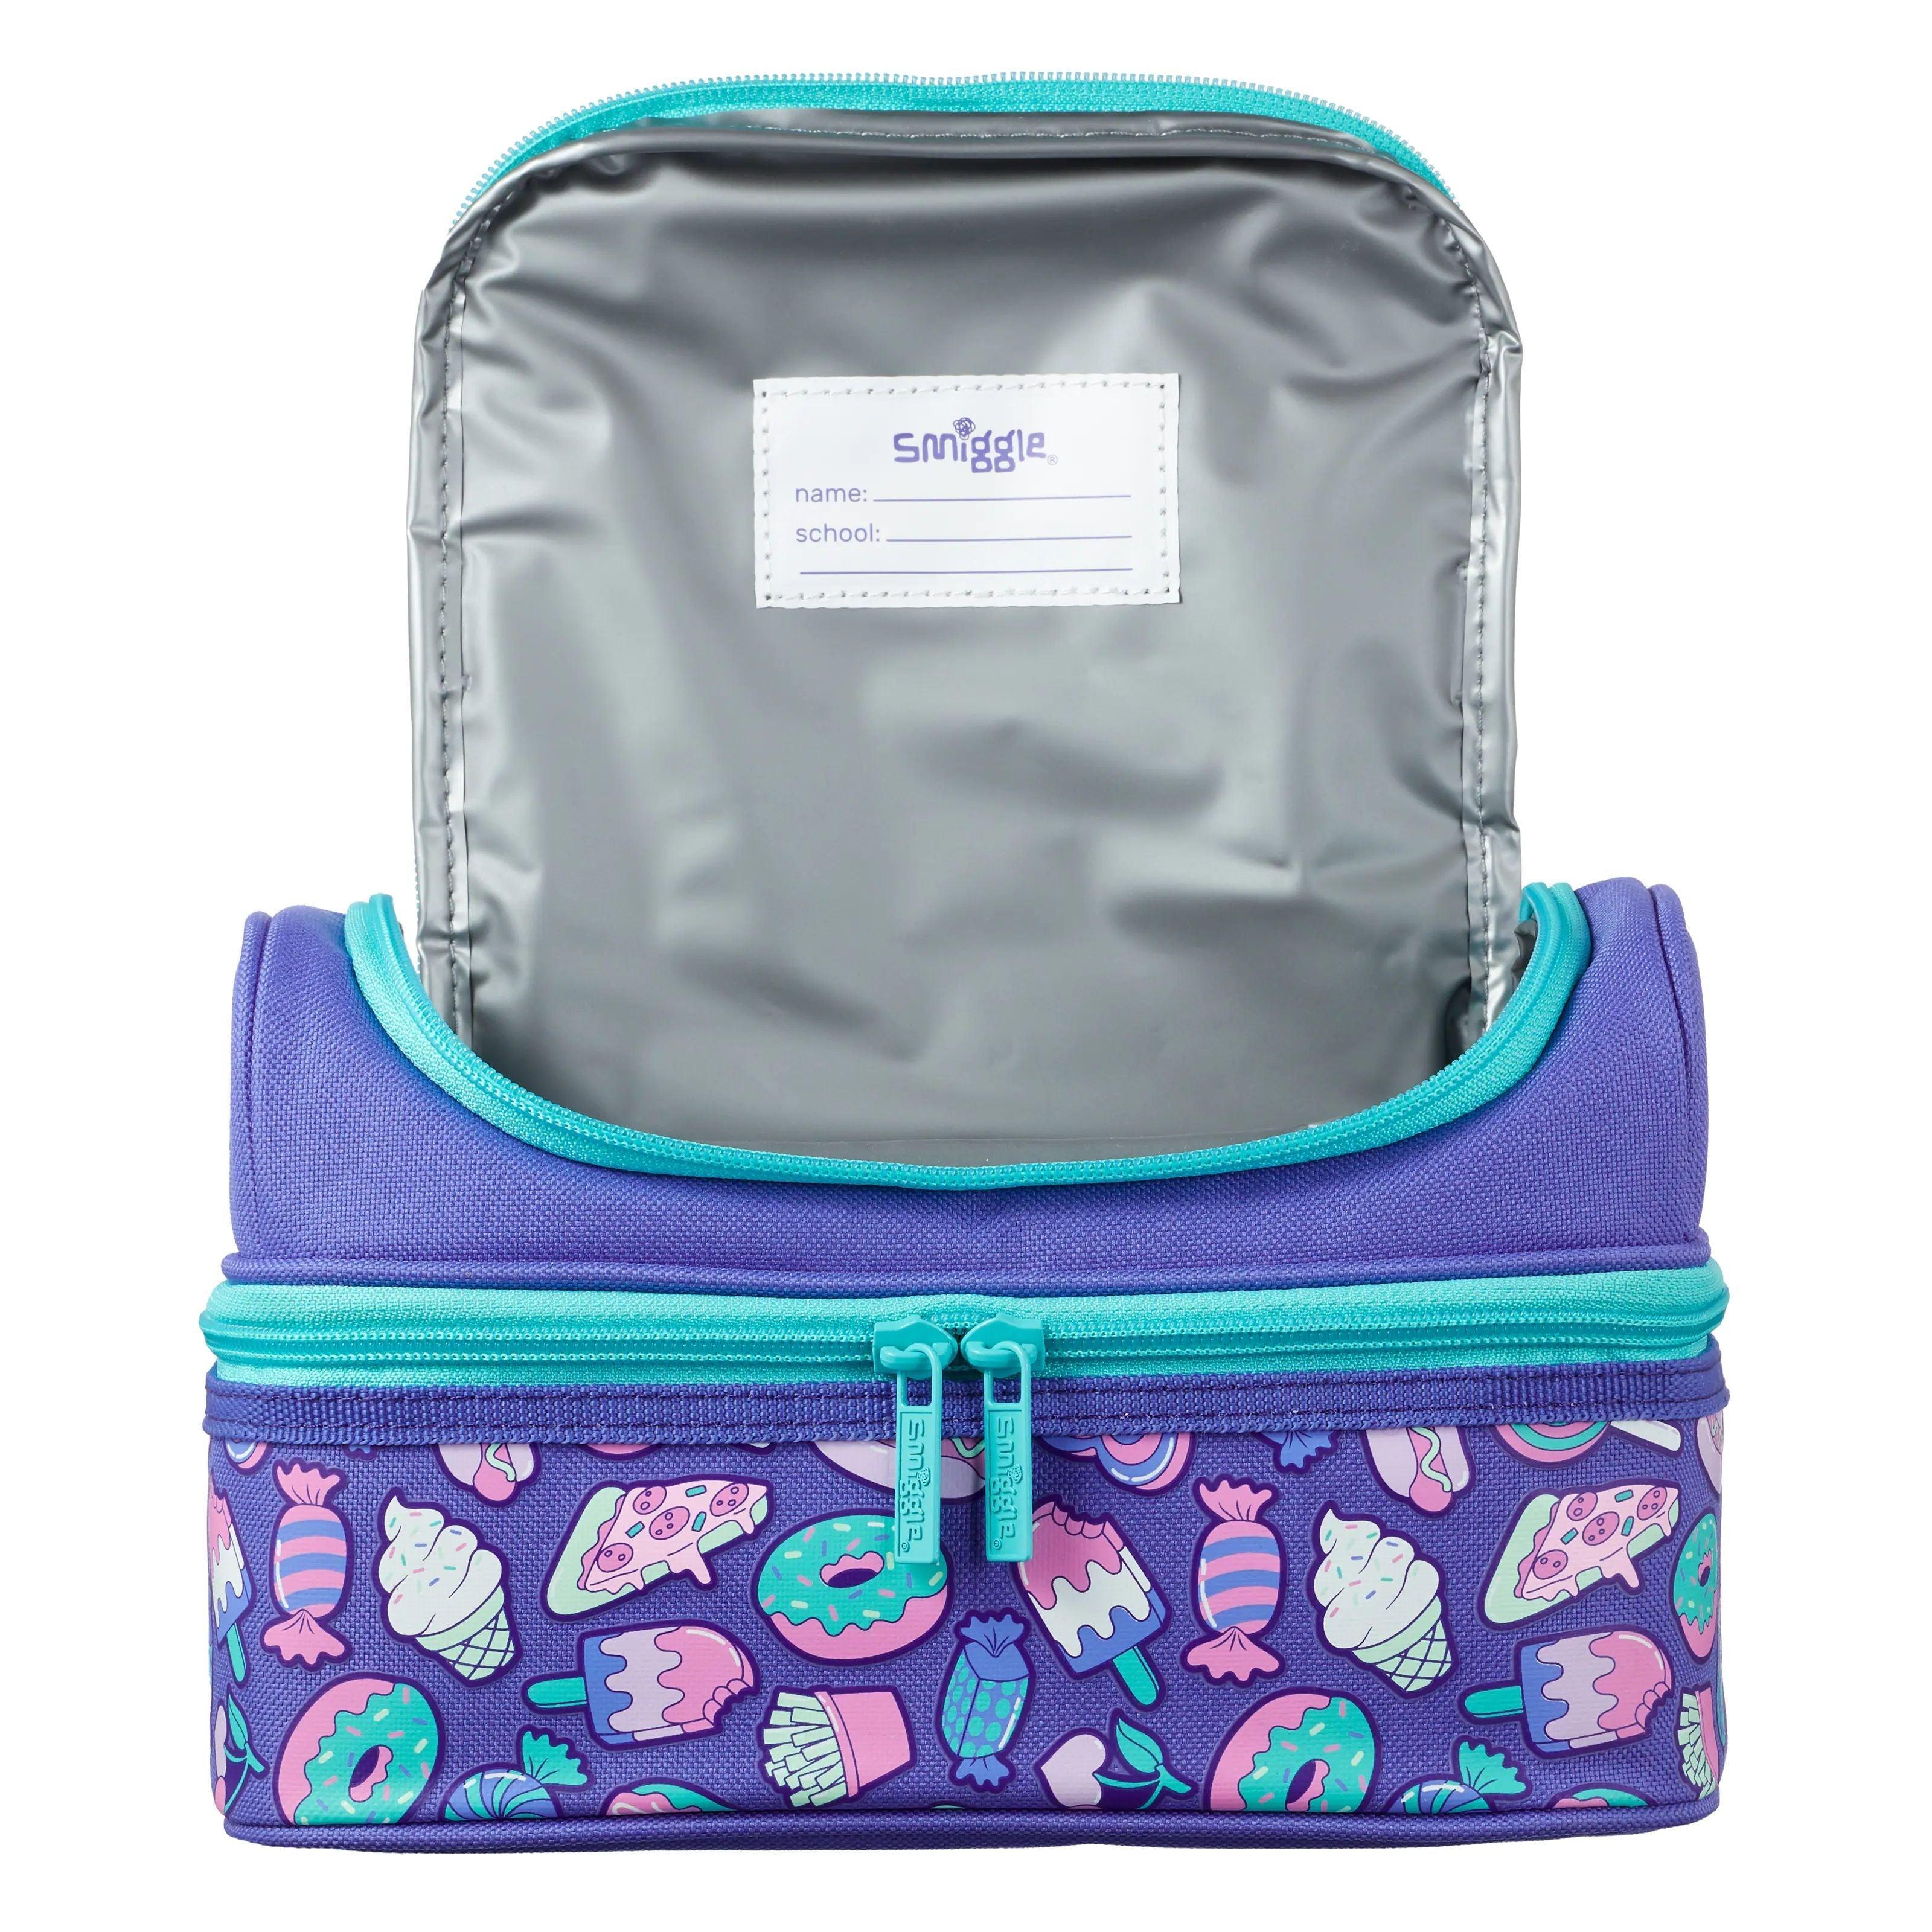 Smiggle Topsy Teeny Tiny Square Lunchbox: Buy Online at Best Price in UAE -  Amazon.ae